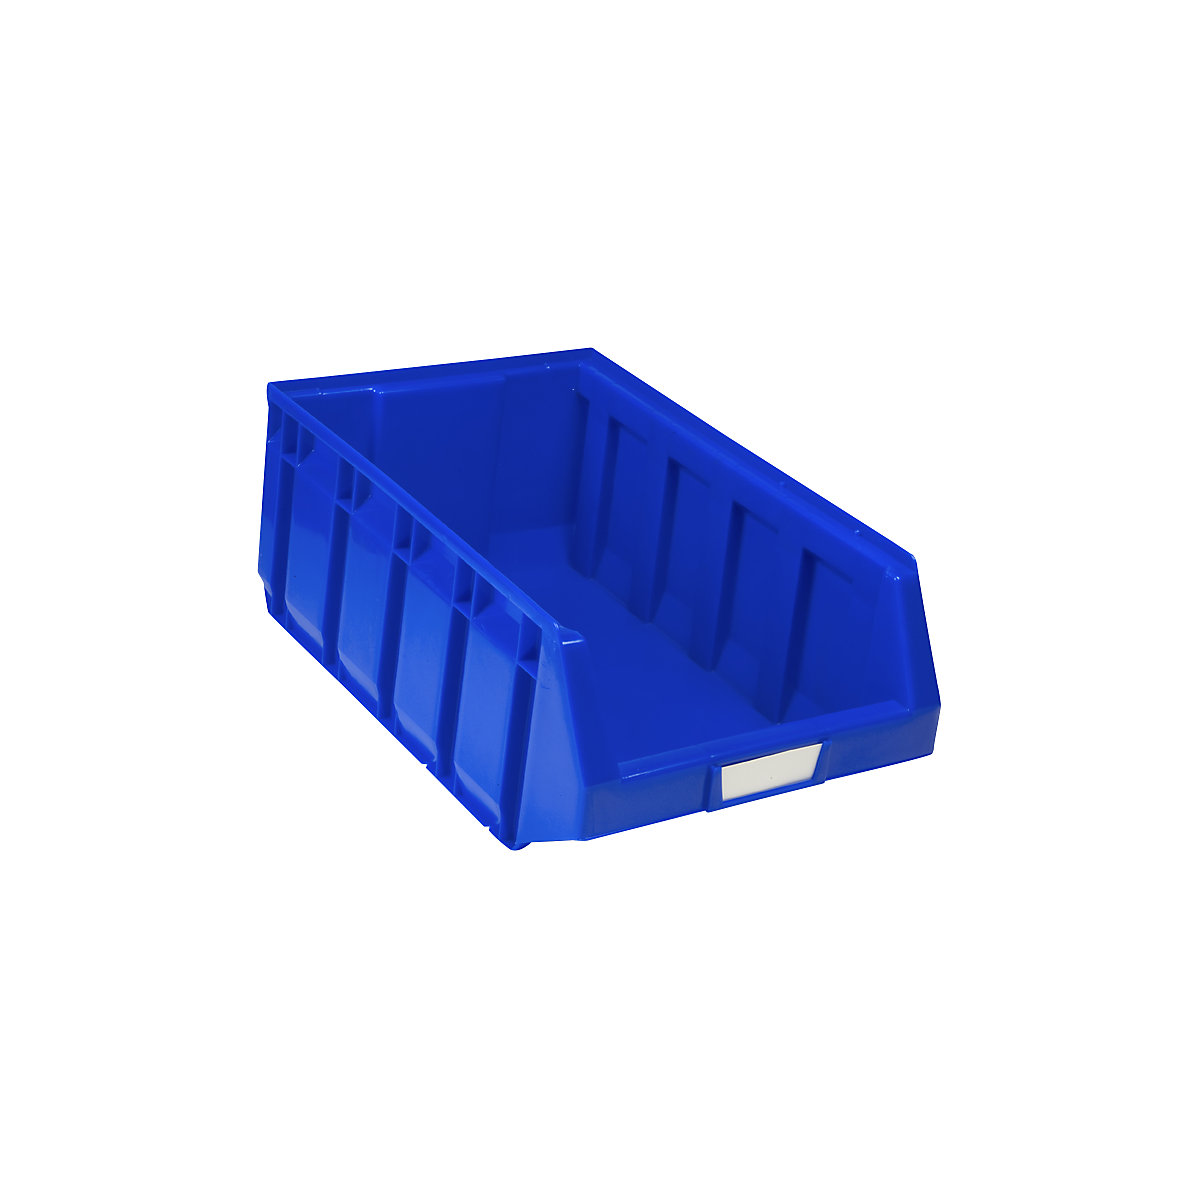 Open fronted storage bin made of polyethylene, LxWxH 485 x 298 x 189 mm, blue, pack of 12-7